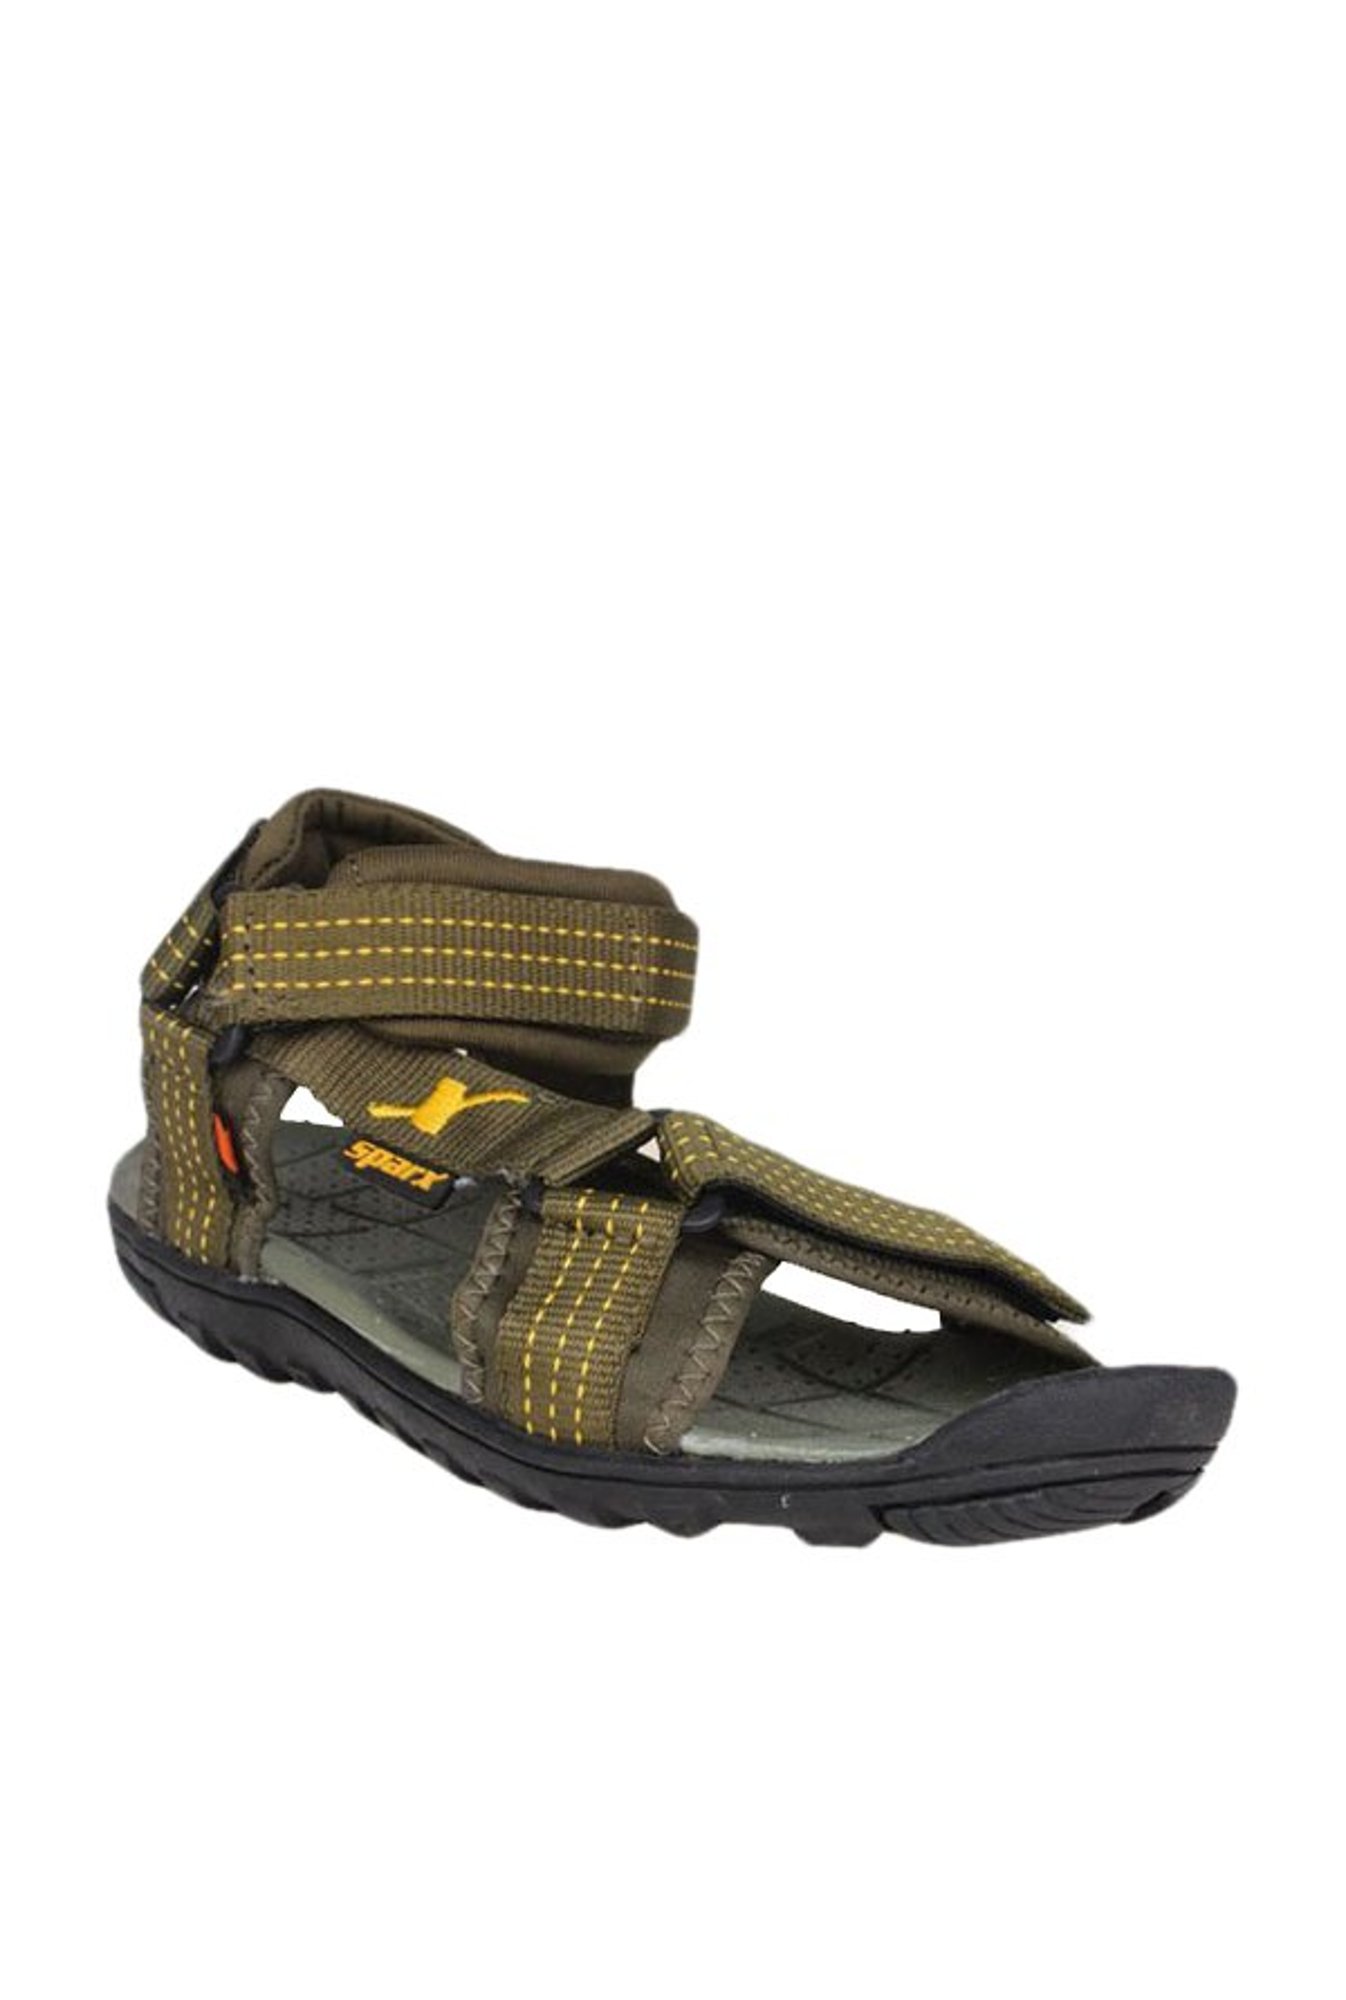 Sparx Olive \u0026 Yellow Floater Sandals 